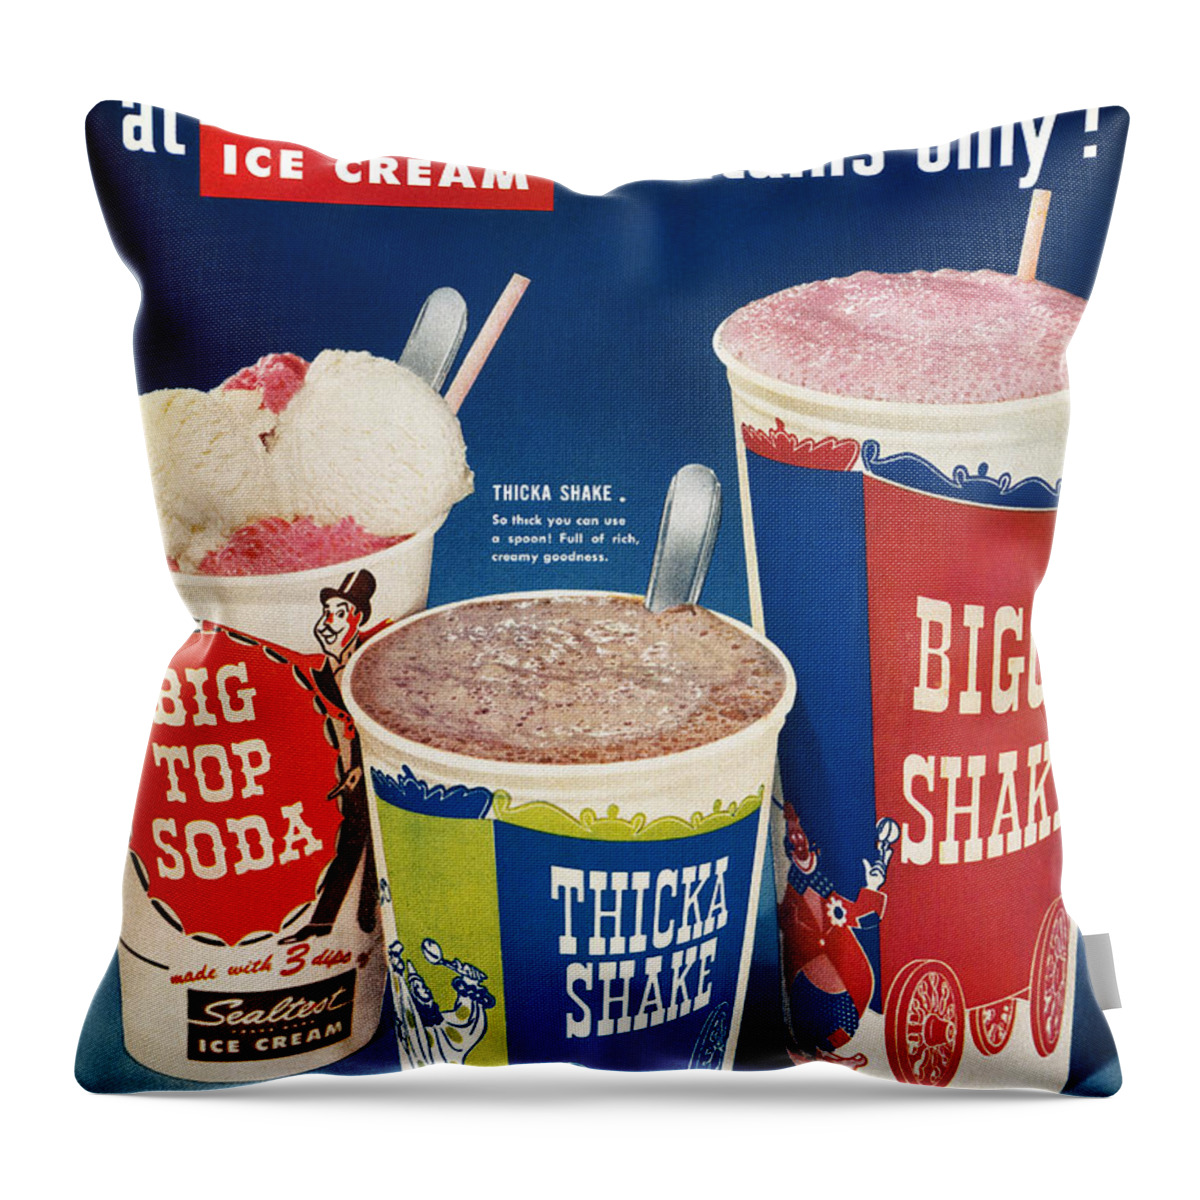 1955 Throw Pillow featuring the photograph Ice Cream Ad, 1955 by Granger